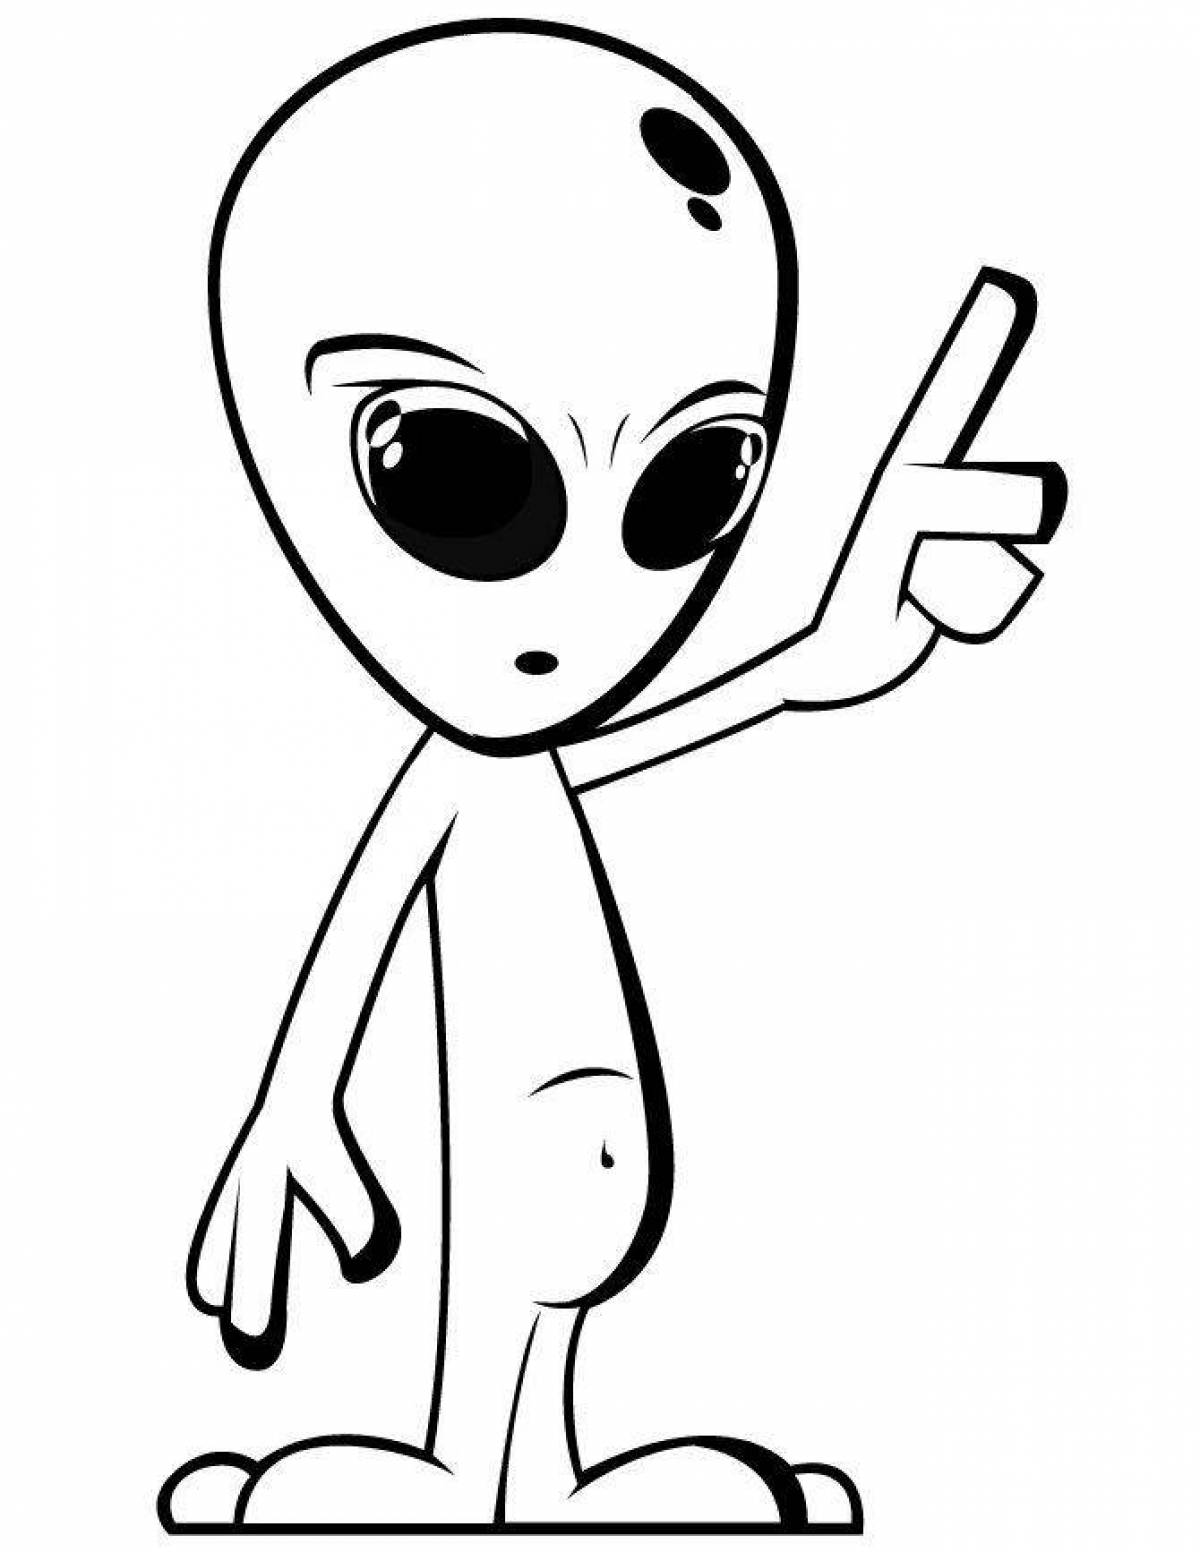 Color-explosion aliens coloring page for kids